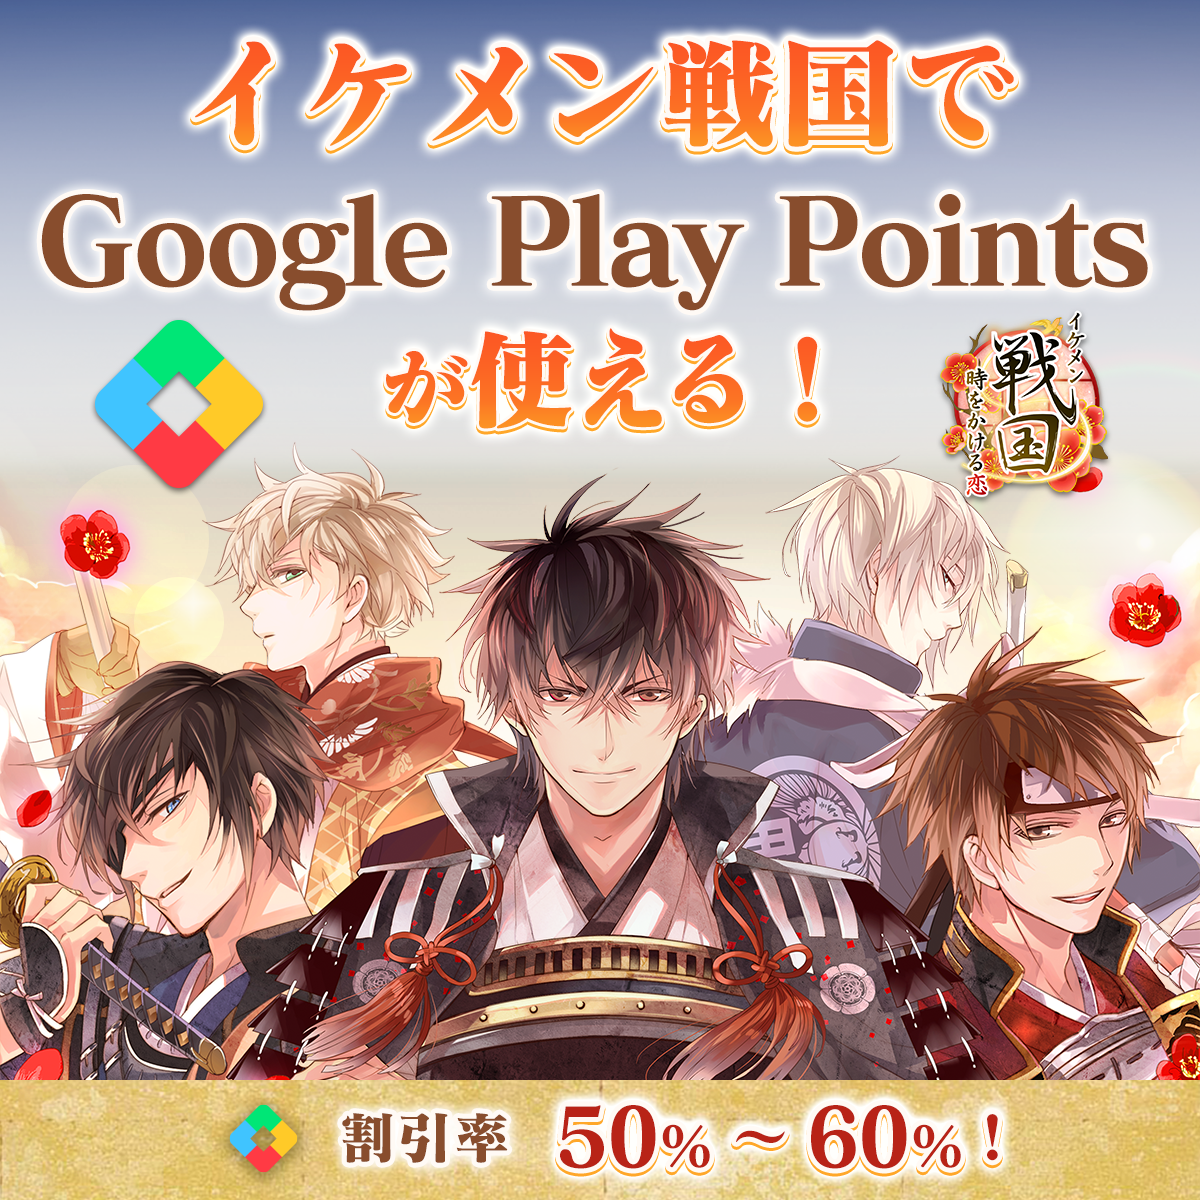 【Androidをお使いの方へ】『Google Play Points』に対応！